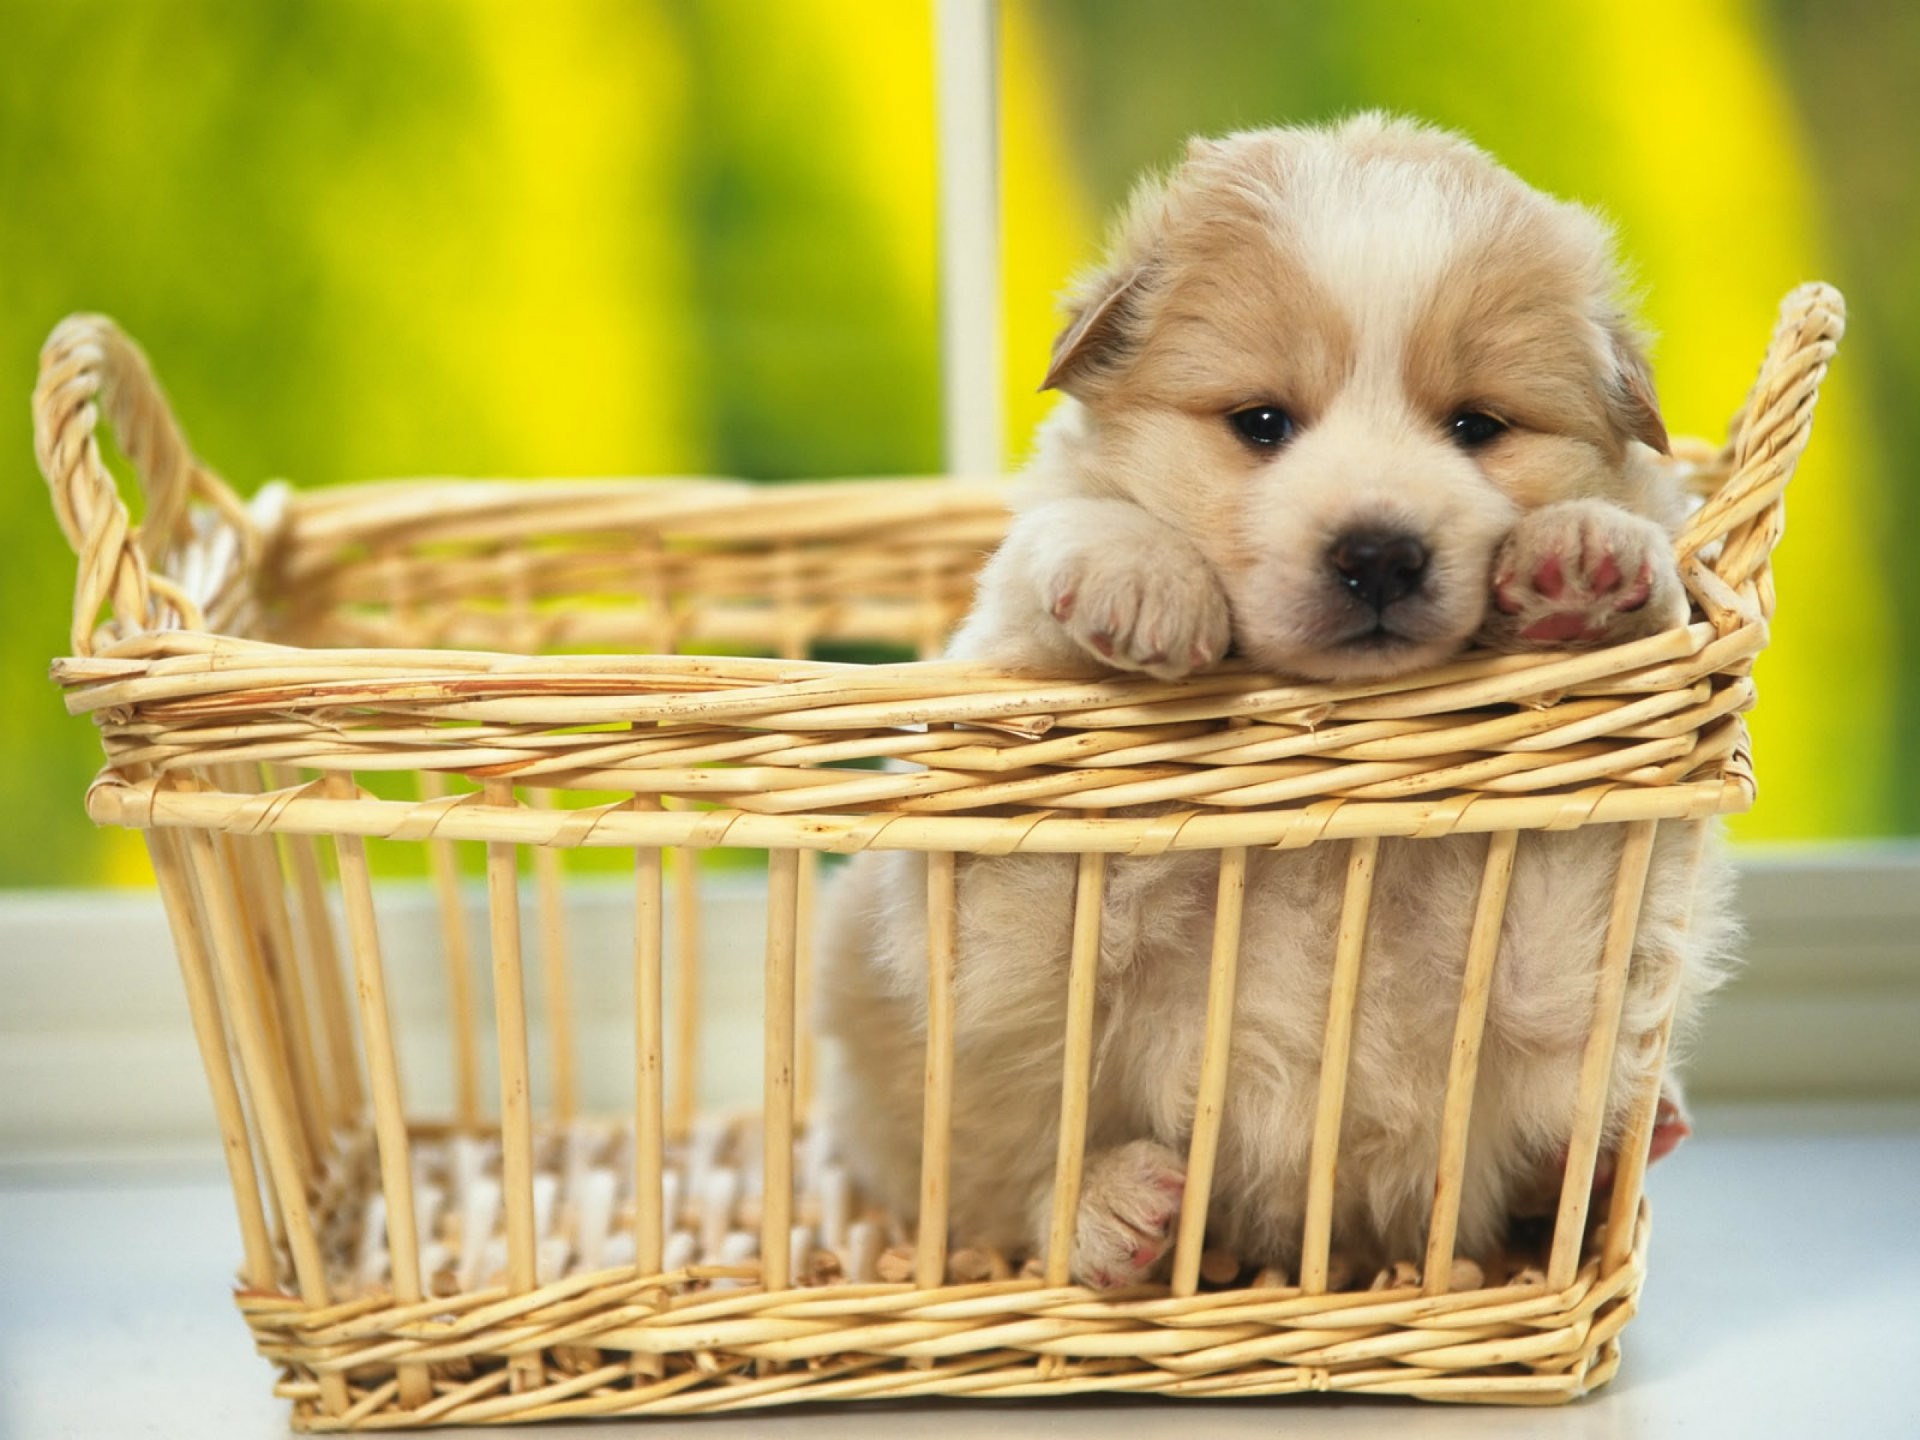 1920x1440 Cute Puppy Dog Wallpapers Image